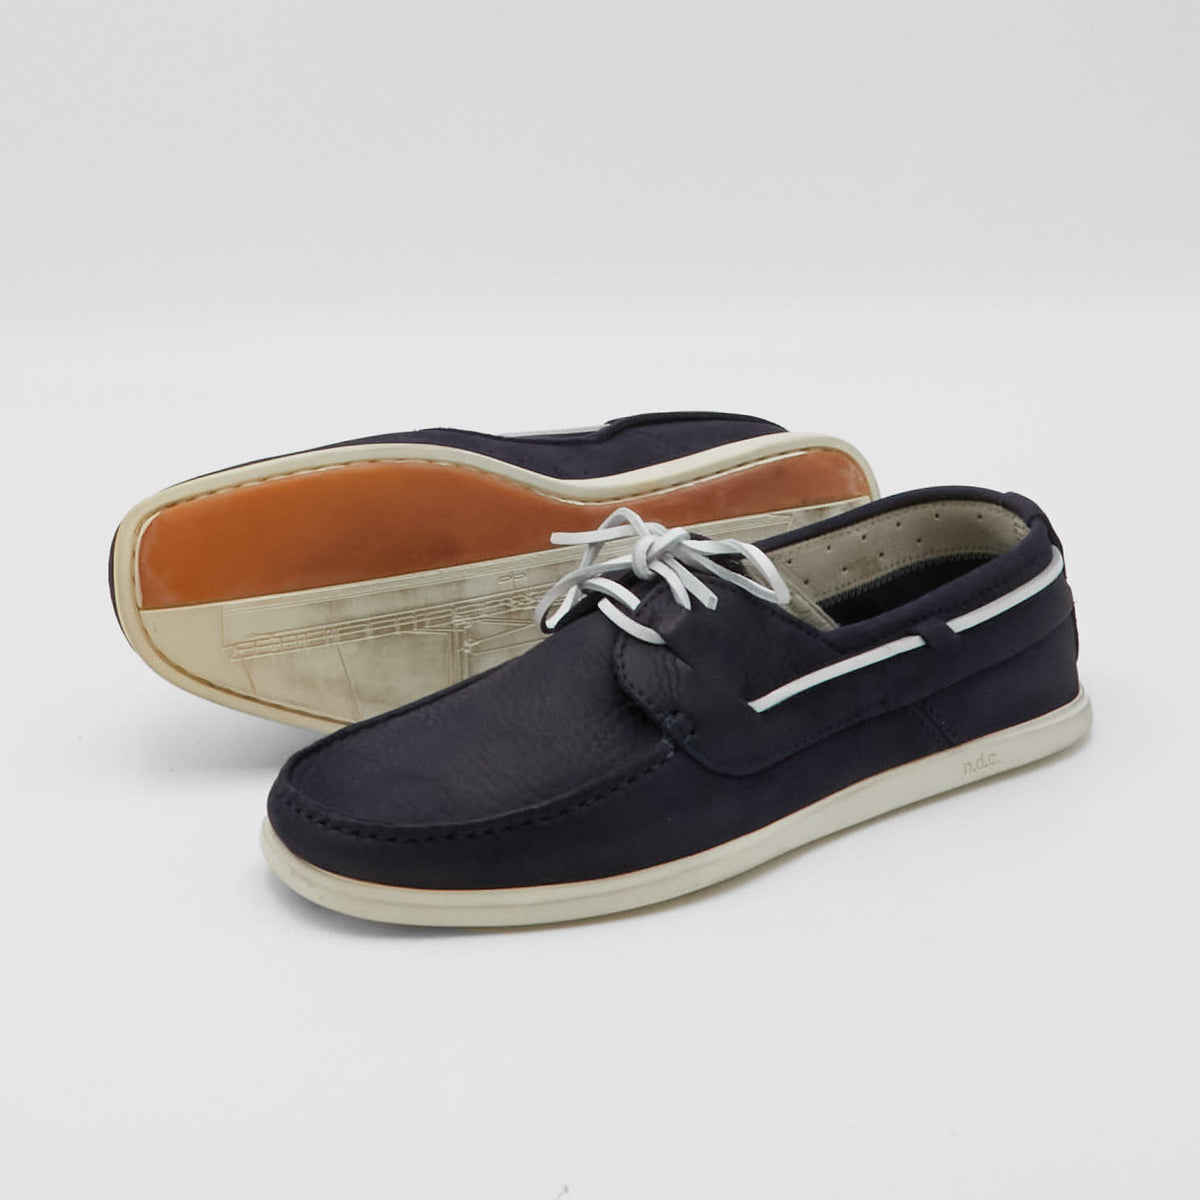 n.d.c made by hand Alithia Vintage Wash Boat Shoes